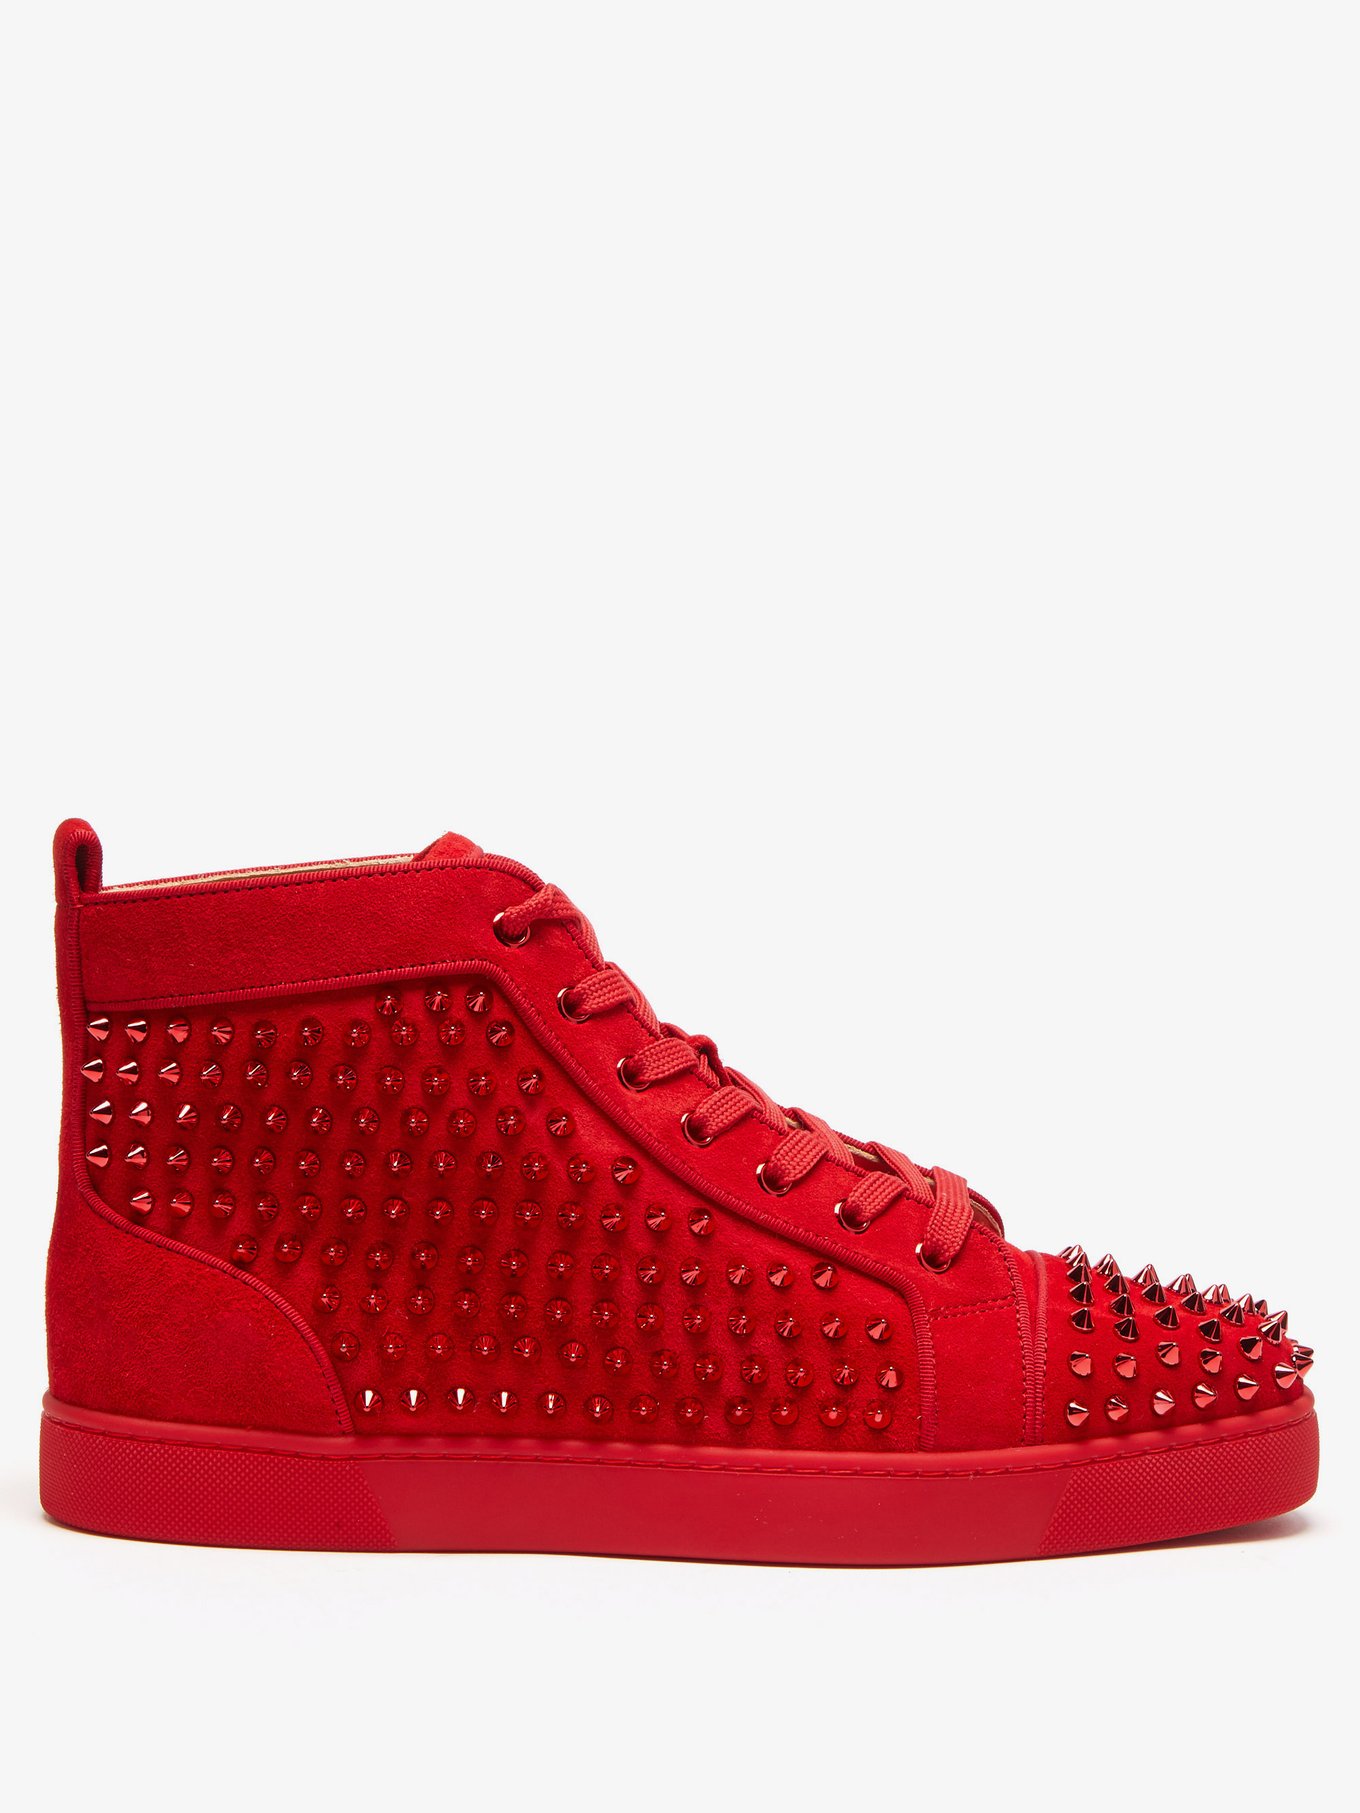 Nominal Optimistic contrast Red Louis Orlato high-top spike-stud suede trainers | Christian Louboutin |  MATCHESFASHION US